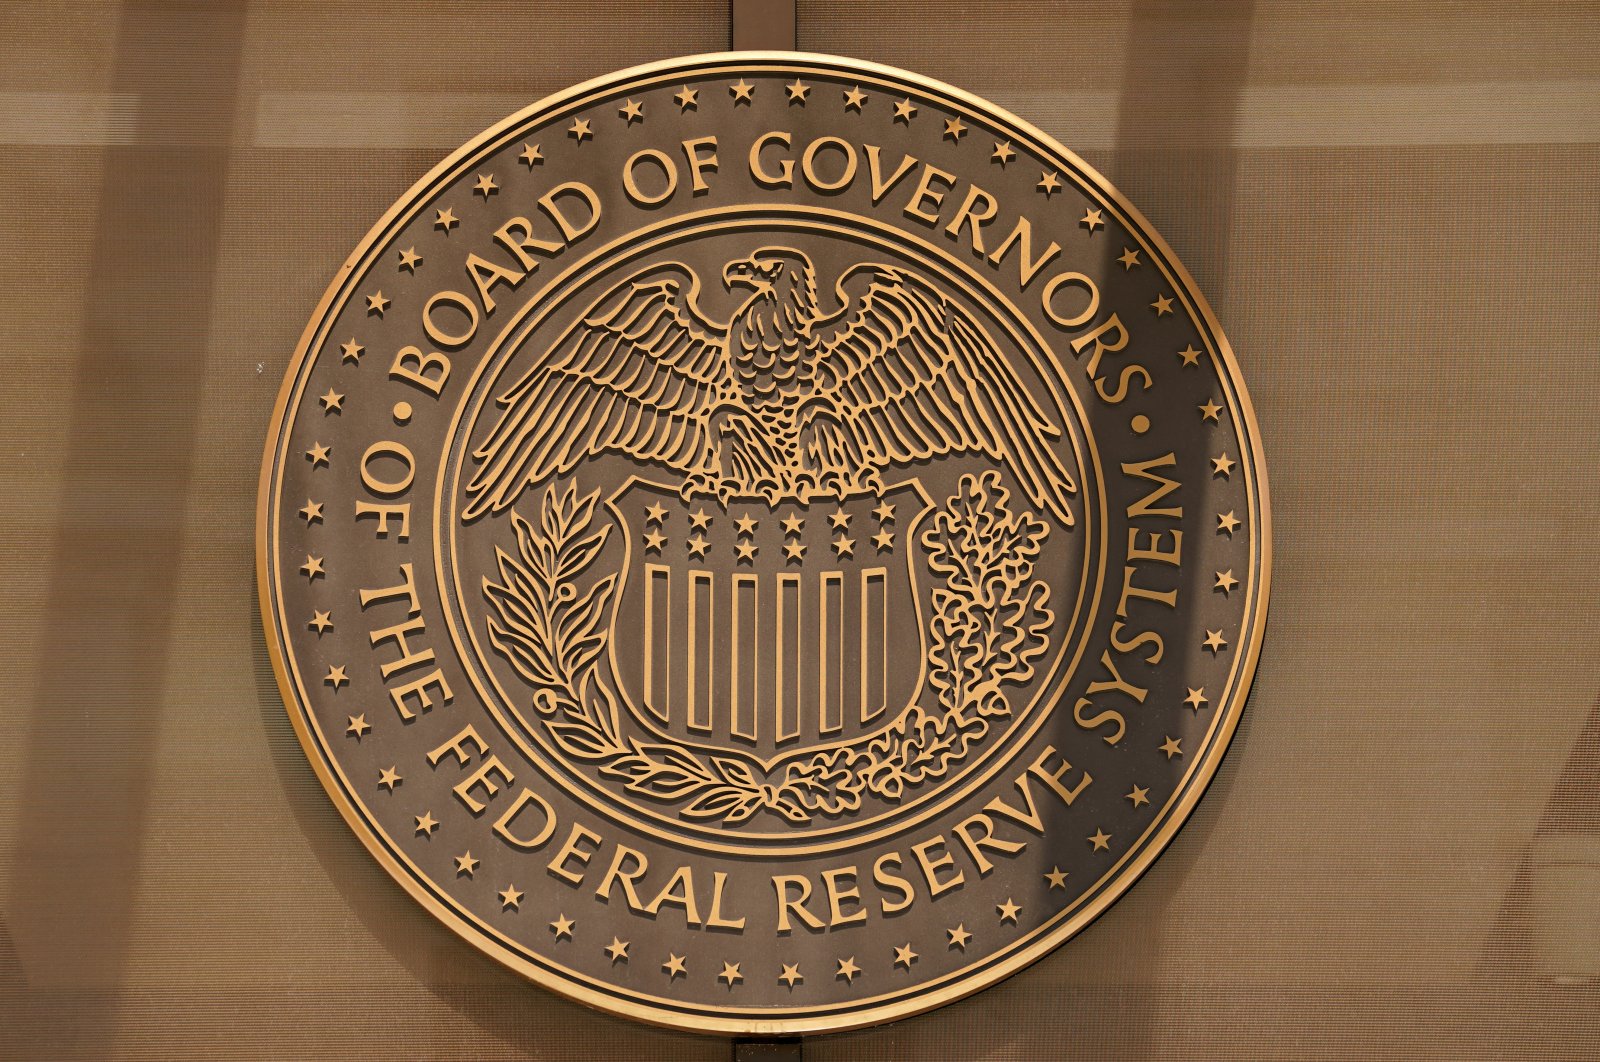 A sign for the Federal Reserve Board of Governors is seen at the entrance to the William McChesney Martin Jr. building, Washington, U.S., Sept. 21, 2022. (Reuters Photo)